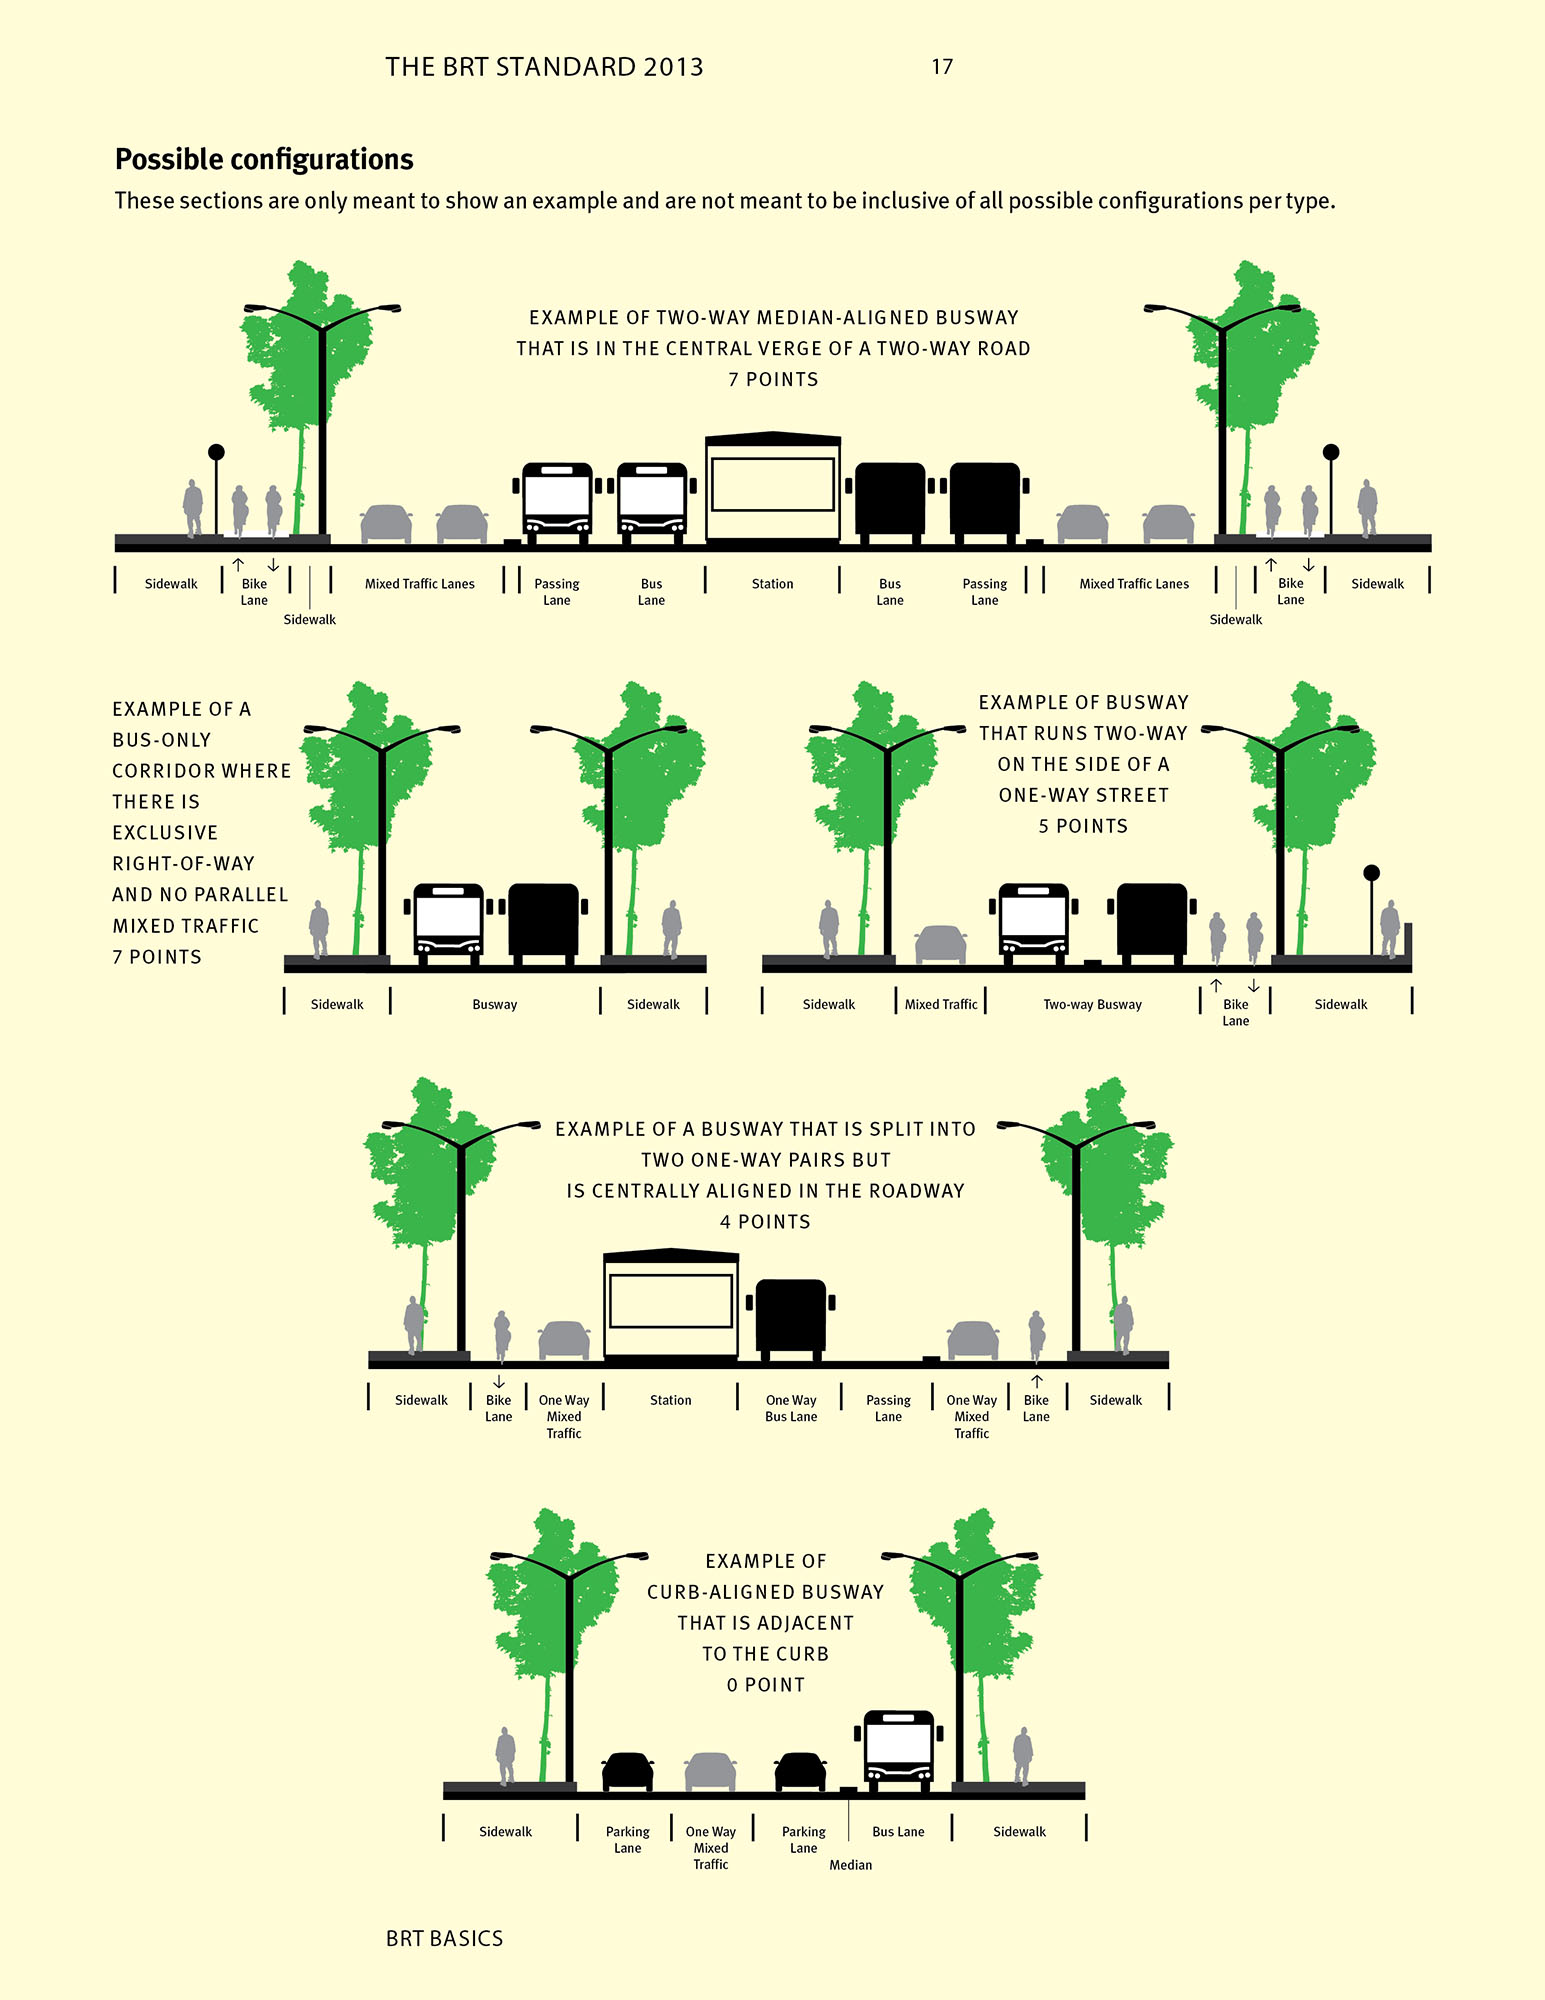 Fig. 22.8 Examples of different BRT roadway configurations from The BRT Standard.